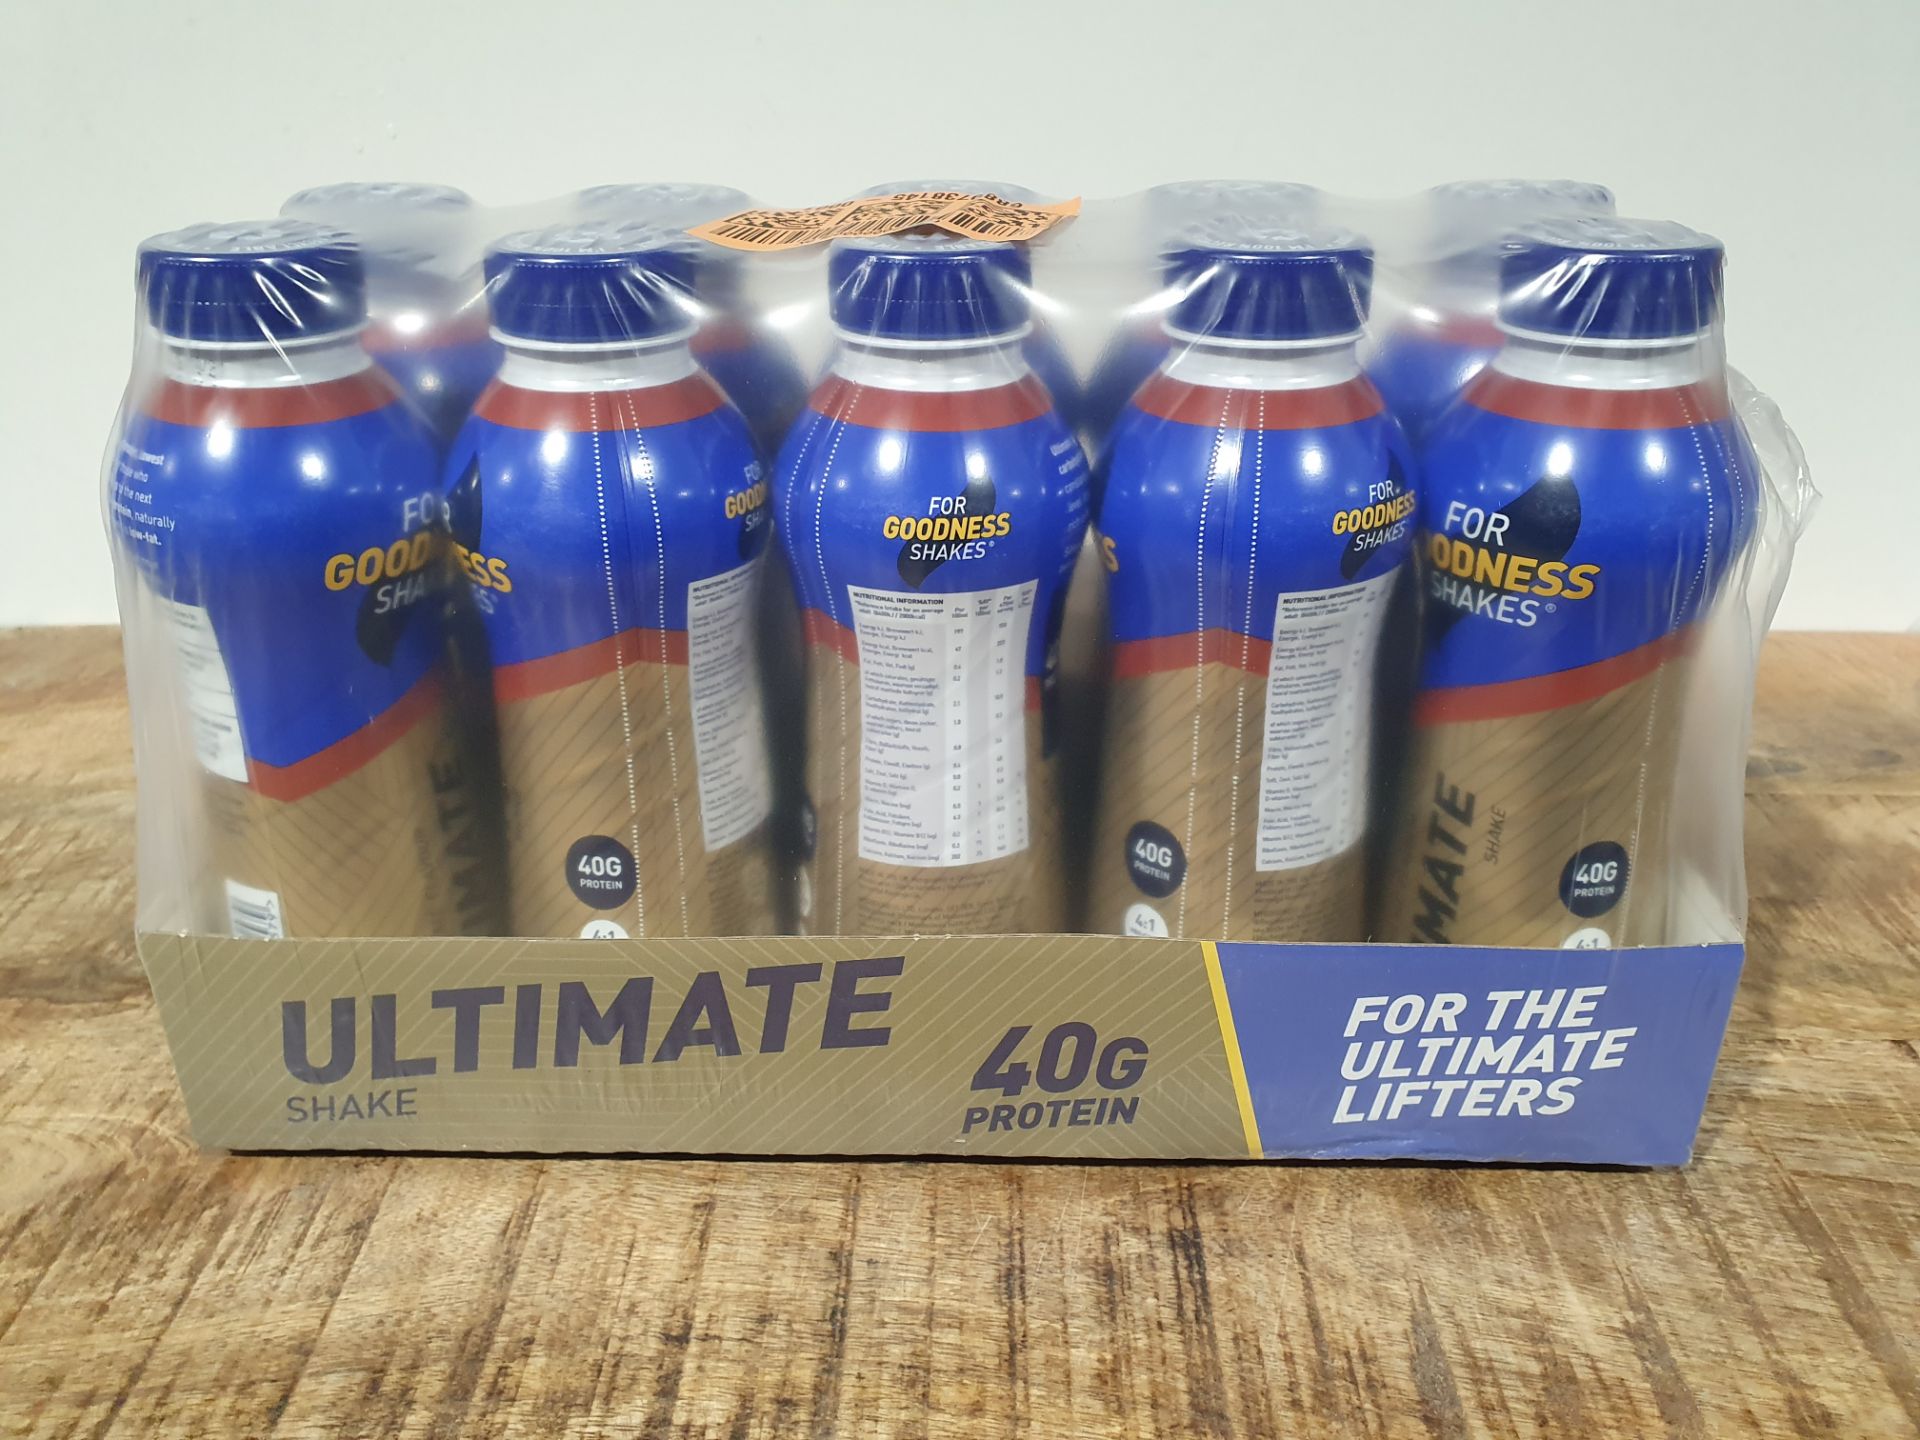 ULTIMATE SHAKE 40G PROTEIN SHAKES - EXPIRED OCTOBER 2021Condition ReportAppraisal Available on